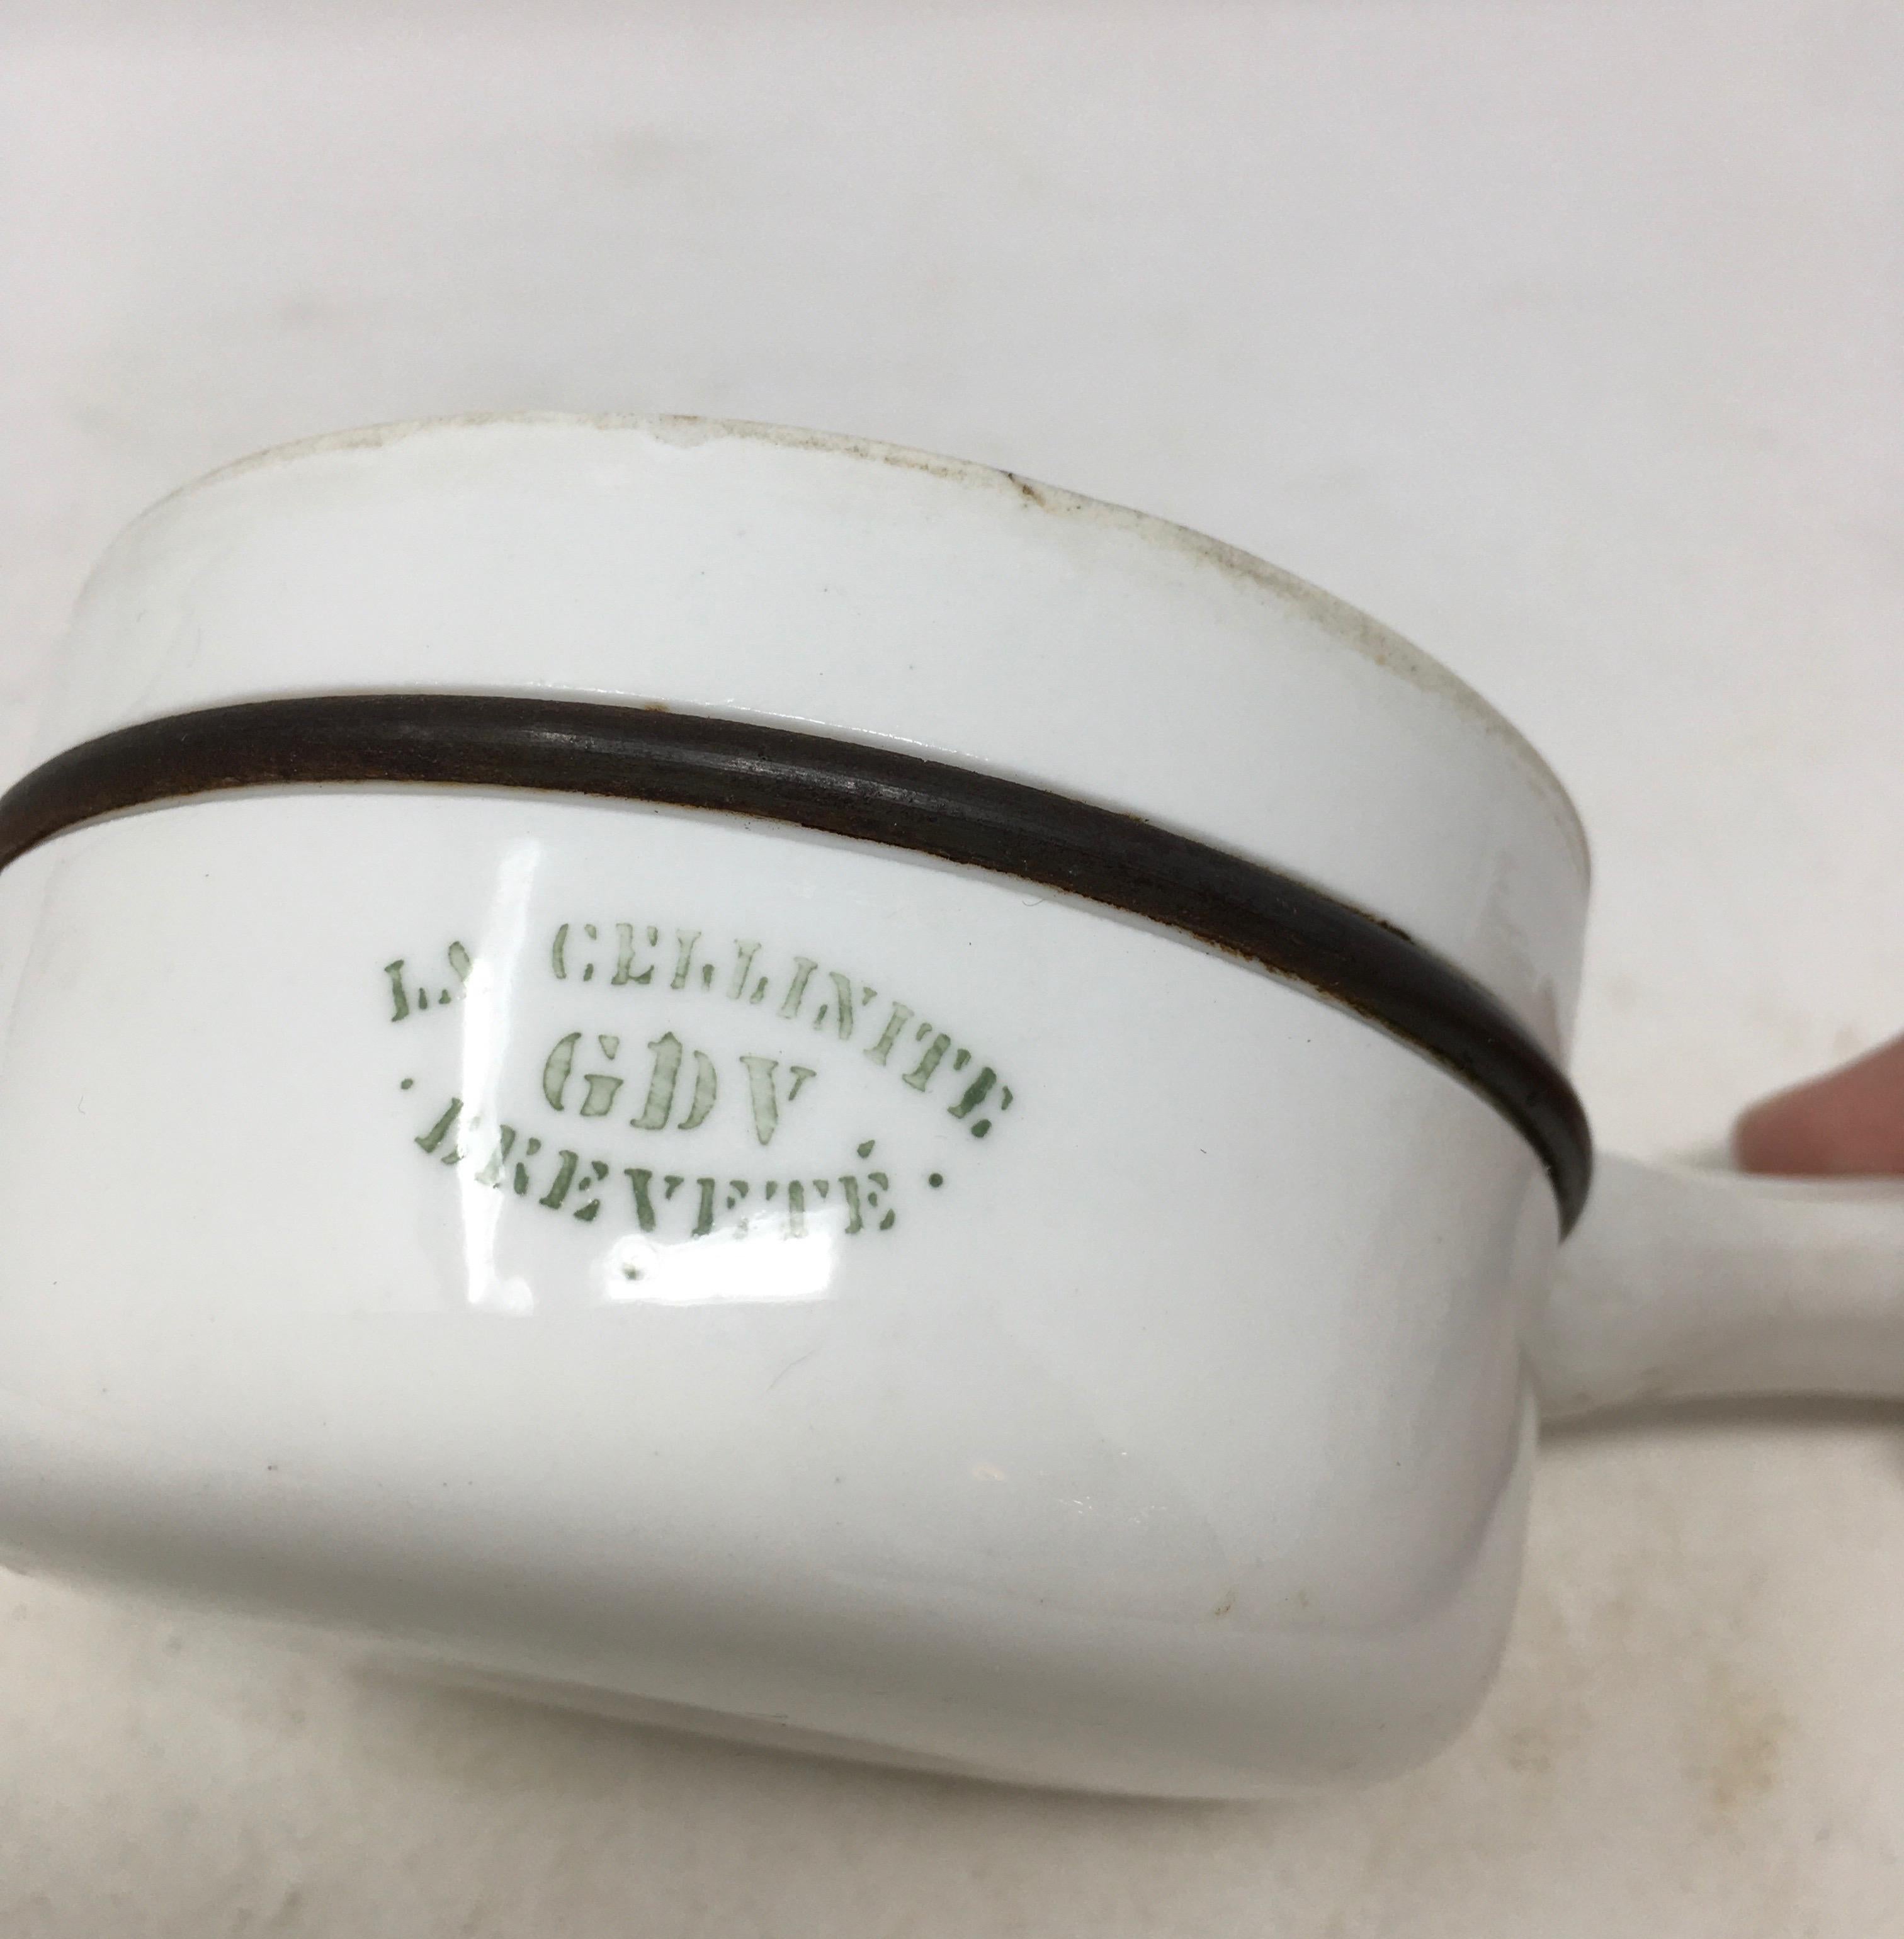 This petite French sauce pan is made of metal and porcelain. The porcelain is marked La Cellinite GDV Brevete, GDV is the mark for Girault, Demay and Vignelet, a company in central France specializing in the production of porcelain for laboratories